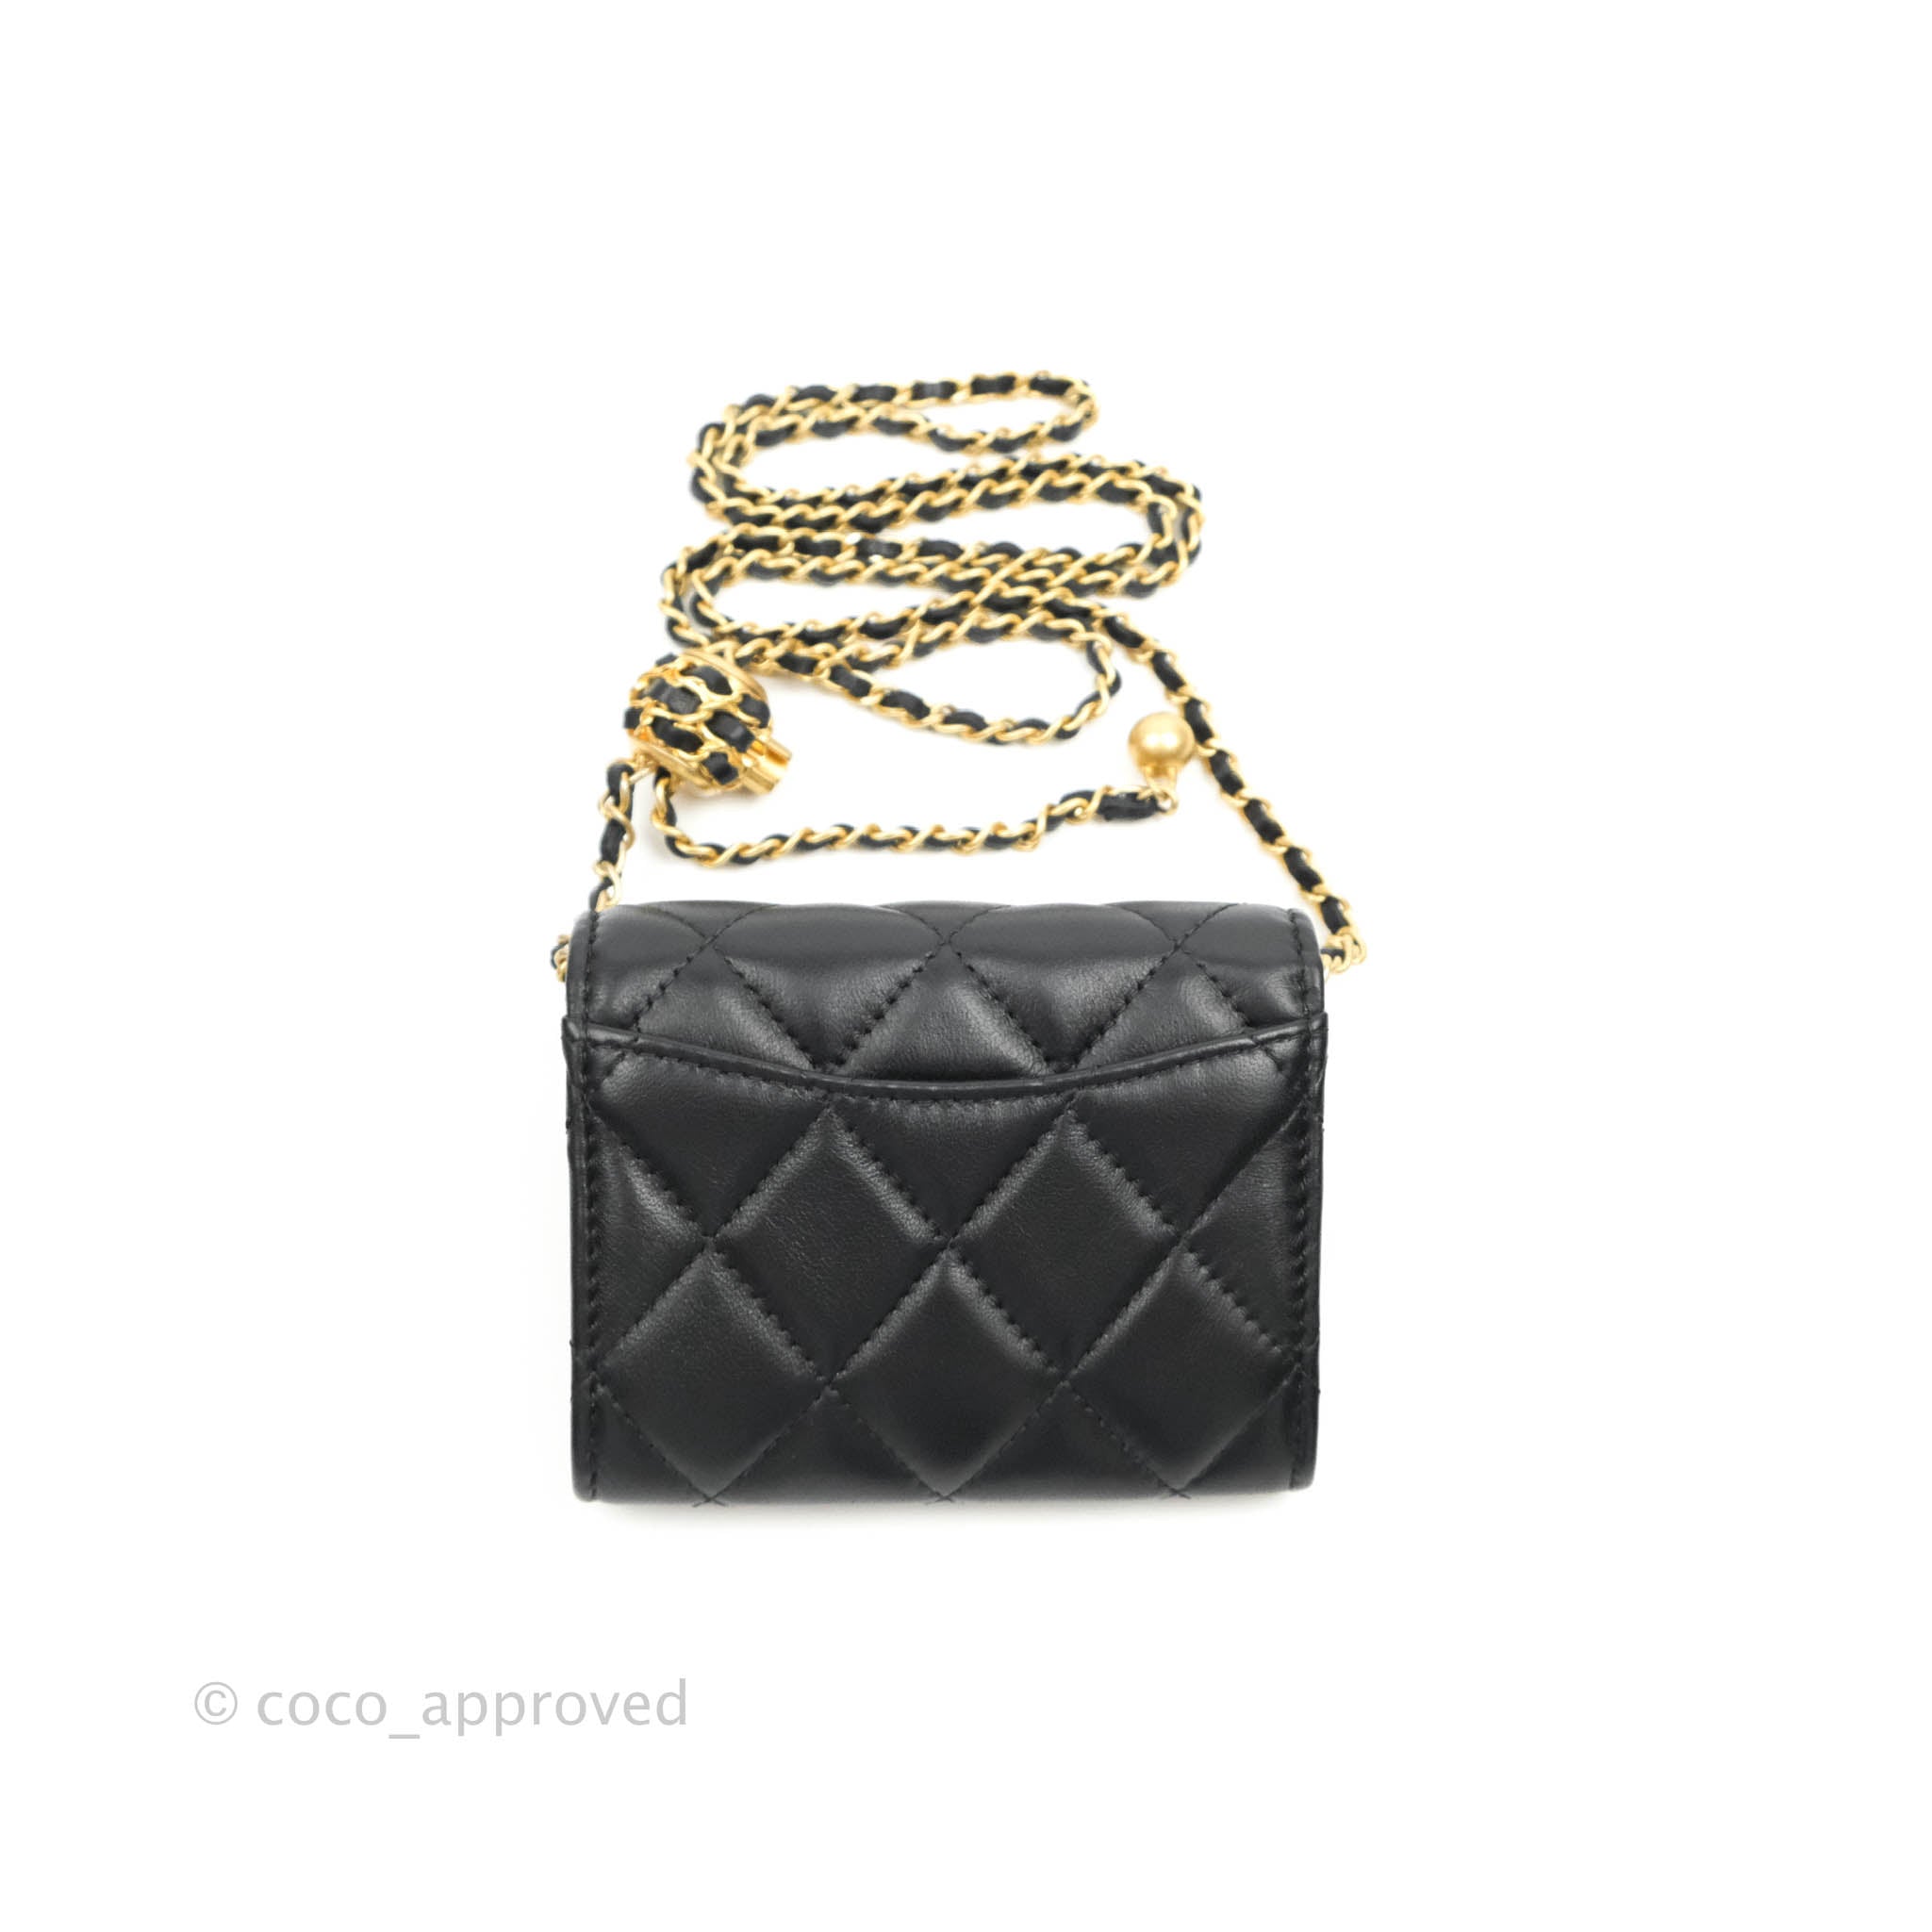 chanel green wallet on chain